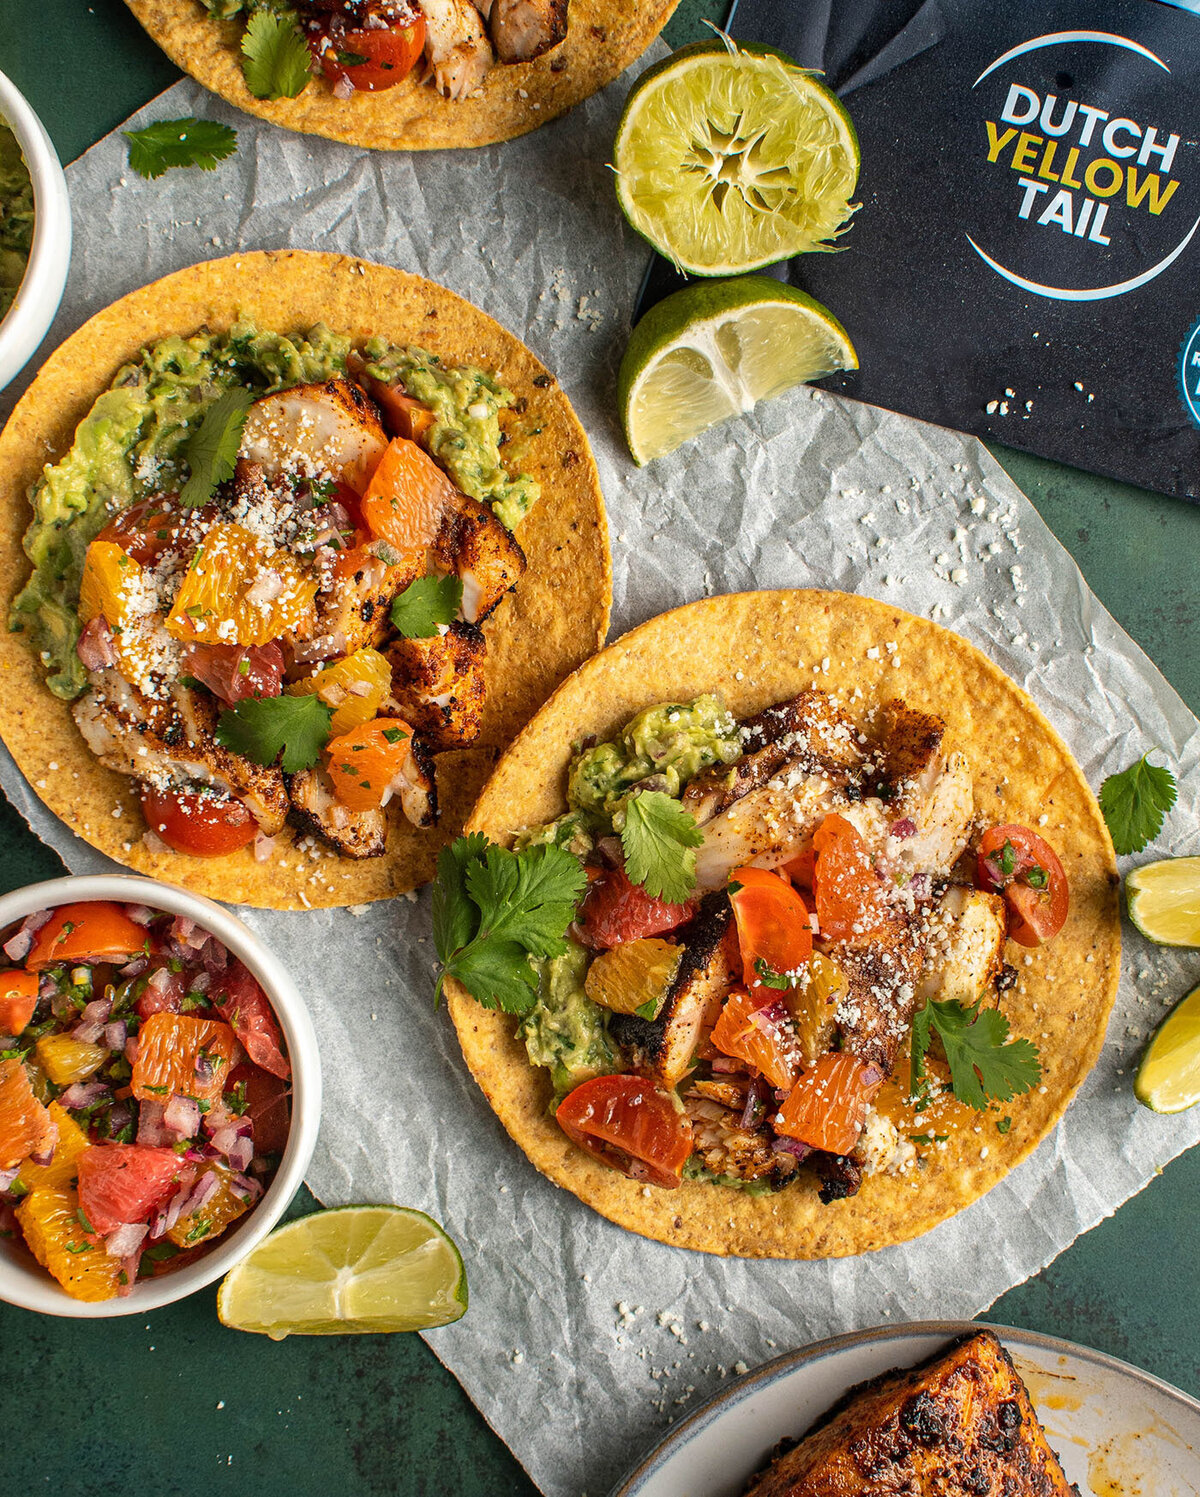 Dutch yellow tail product shot featuring fish tacos